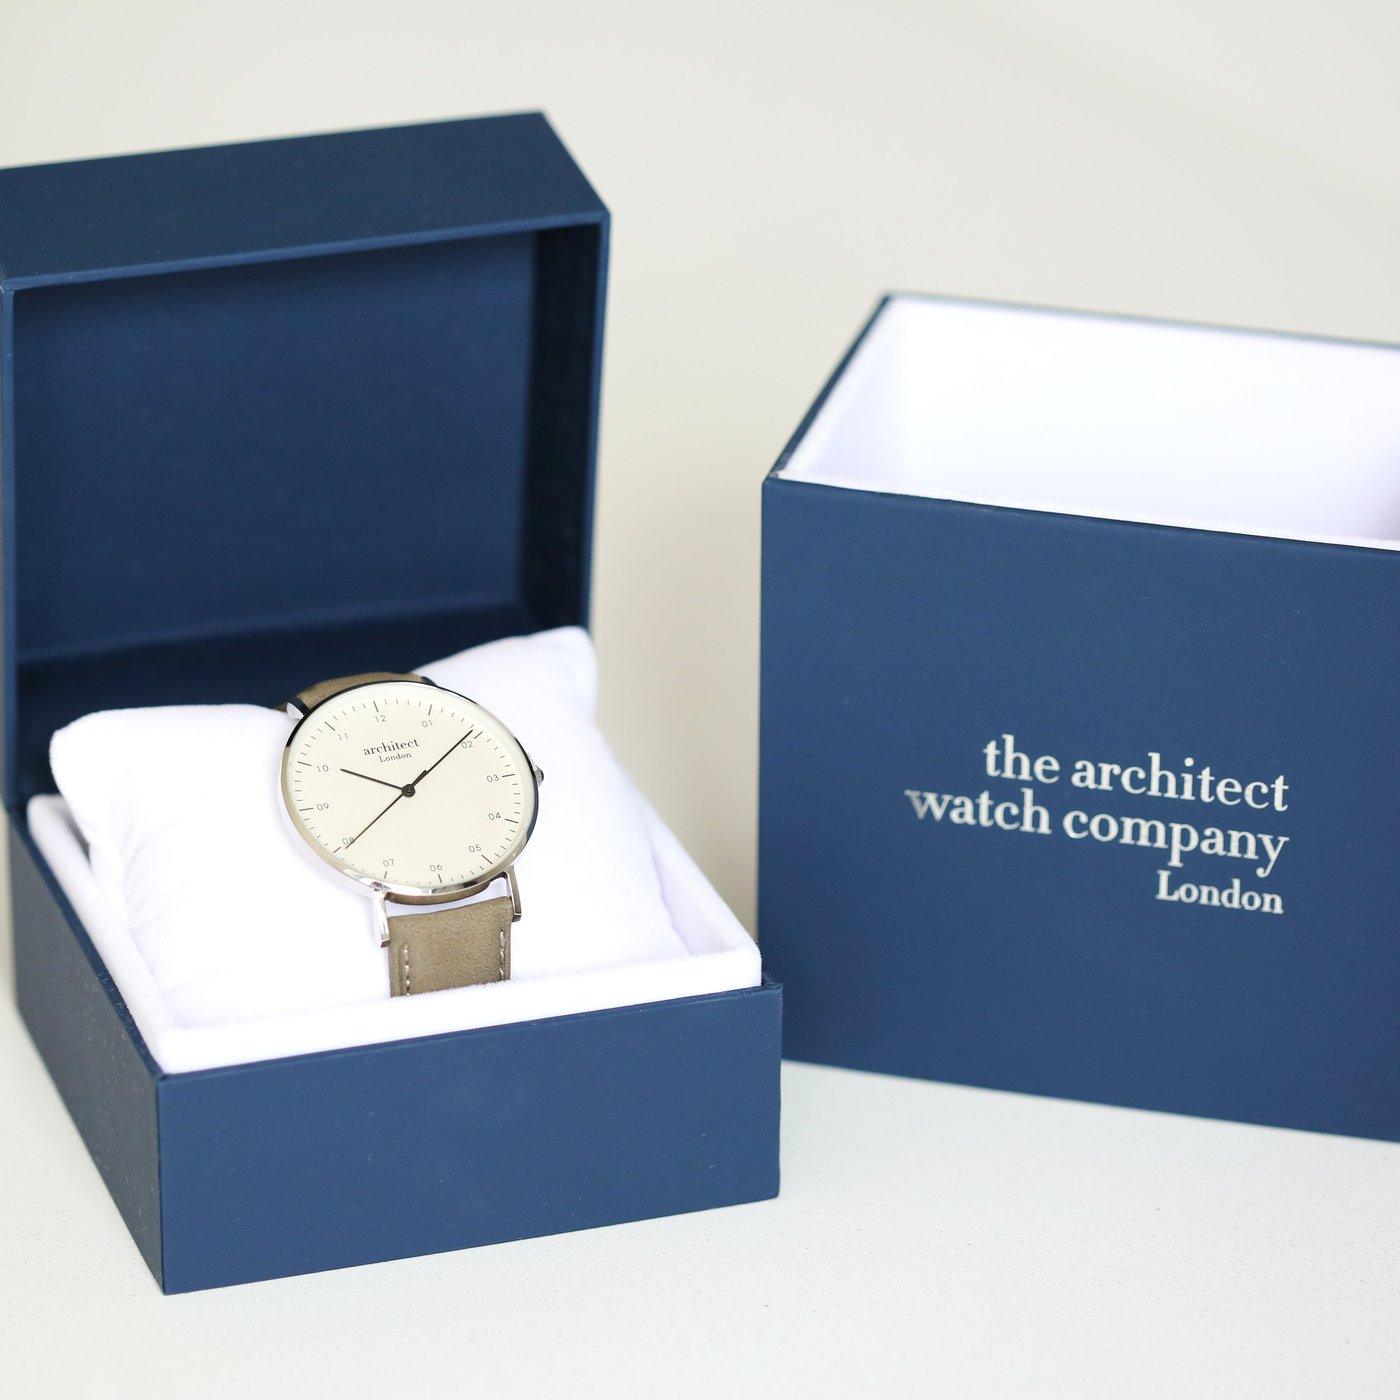 Handwriting Engraving Mens Architect Zephyr Watch With Urban Grey Strap - Shop Personalised Gifts